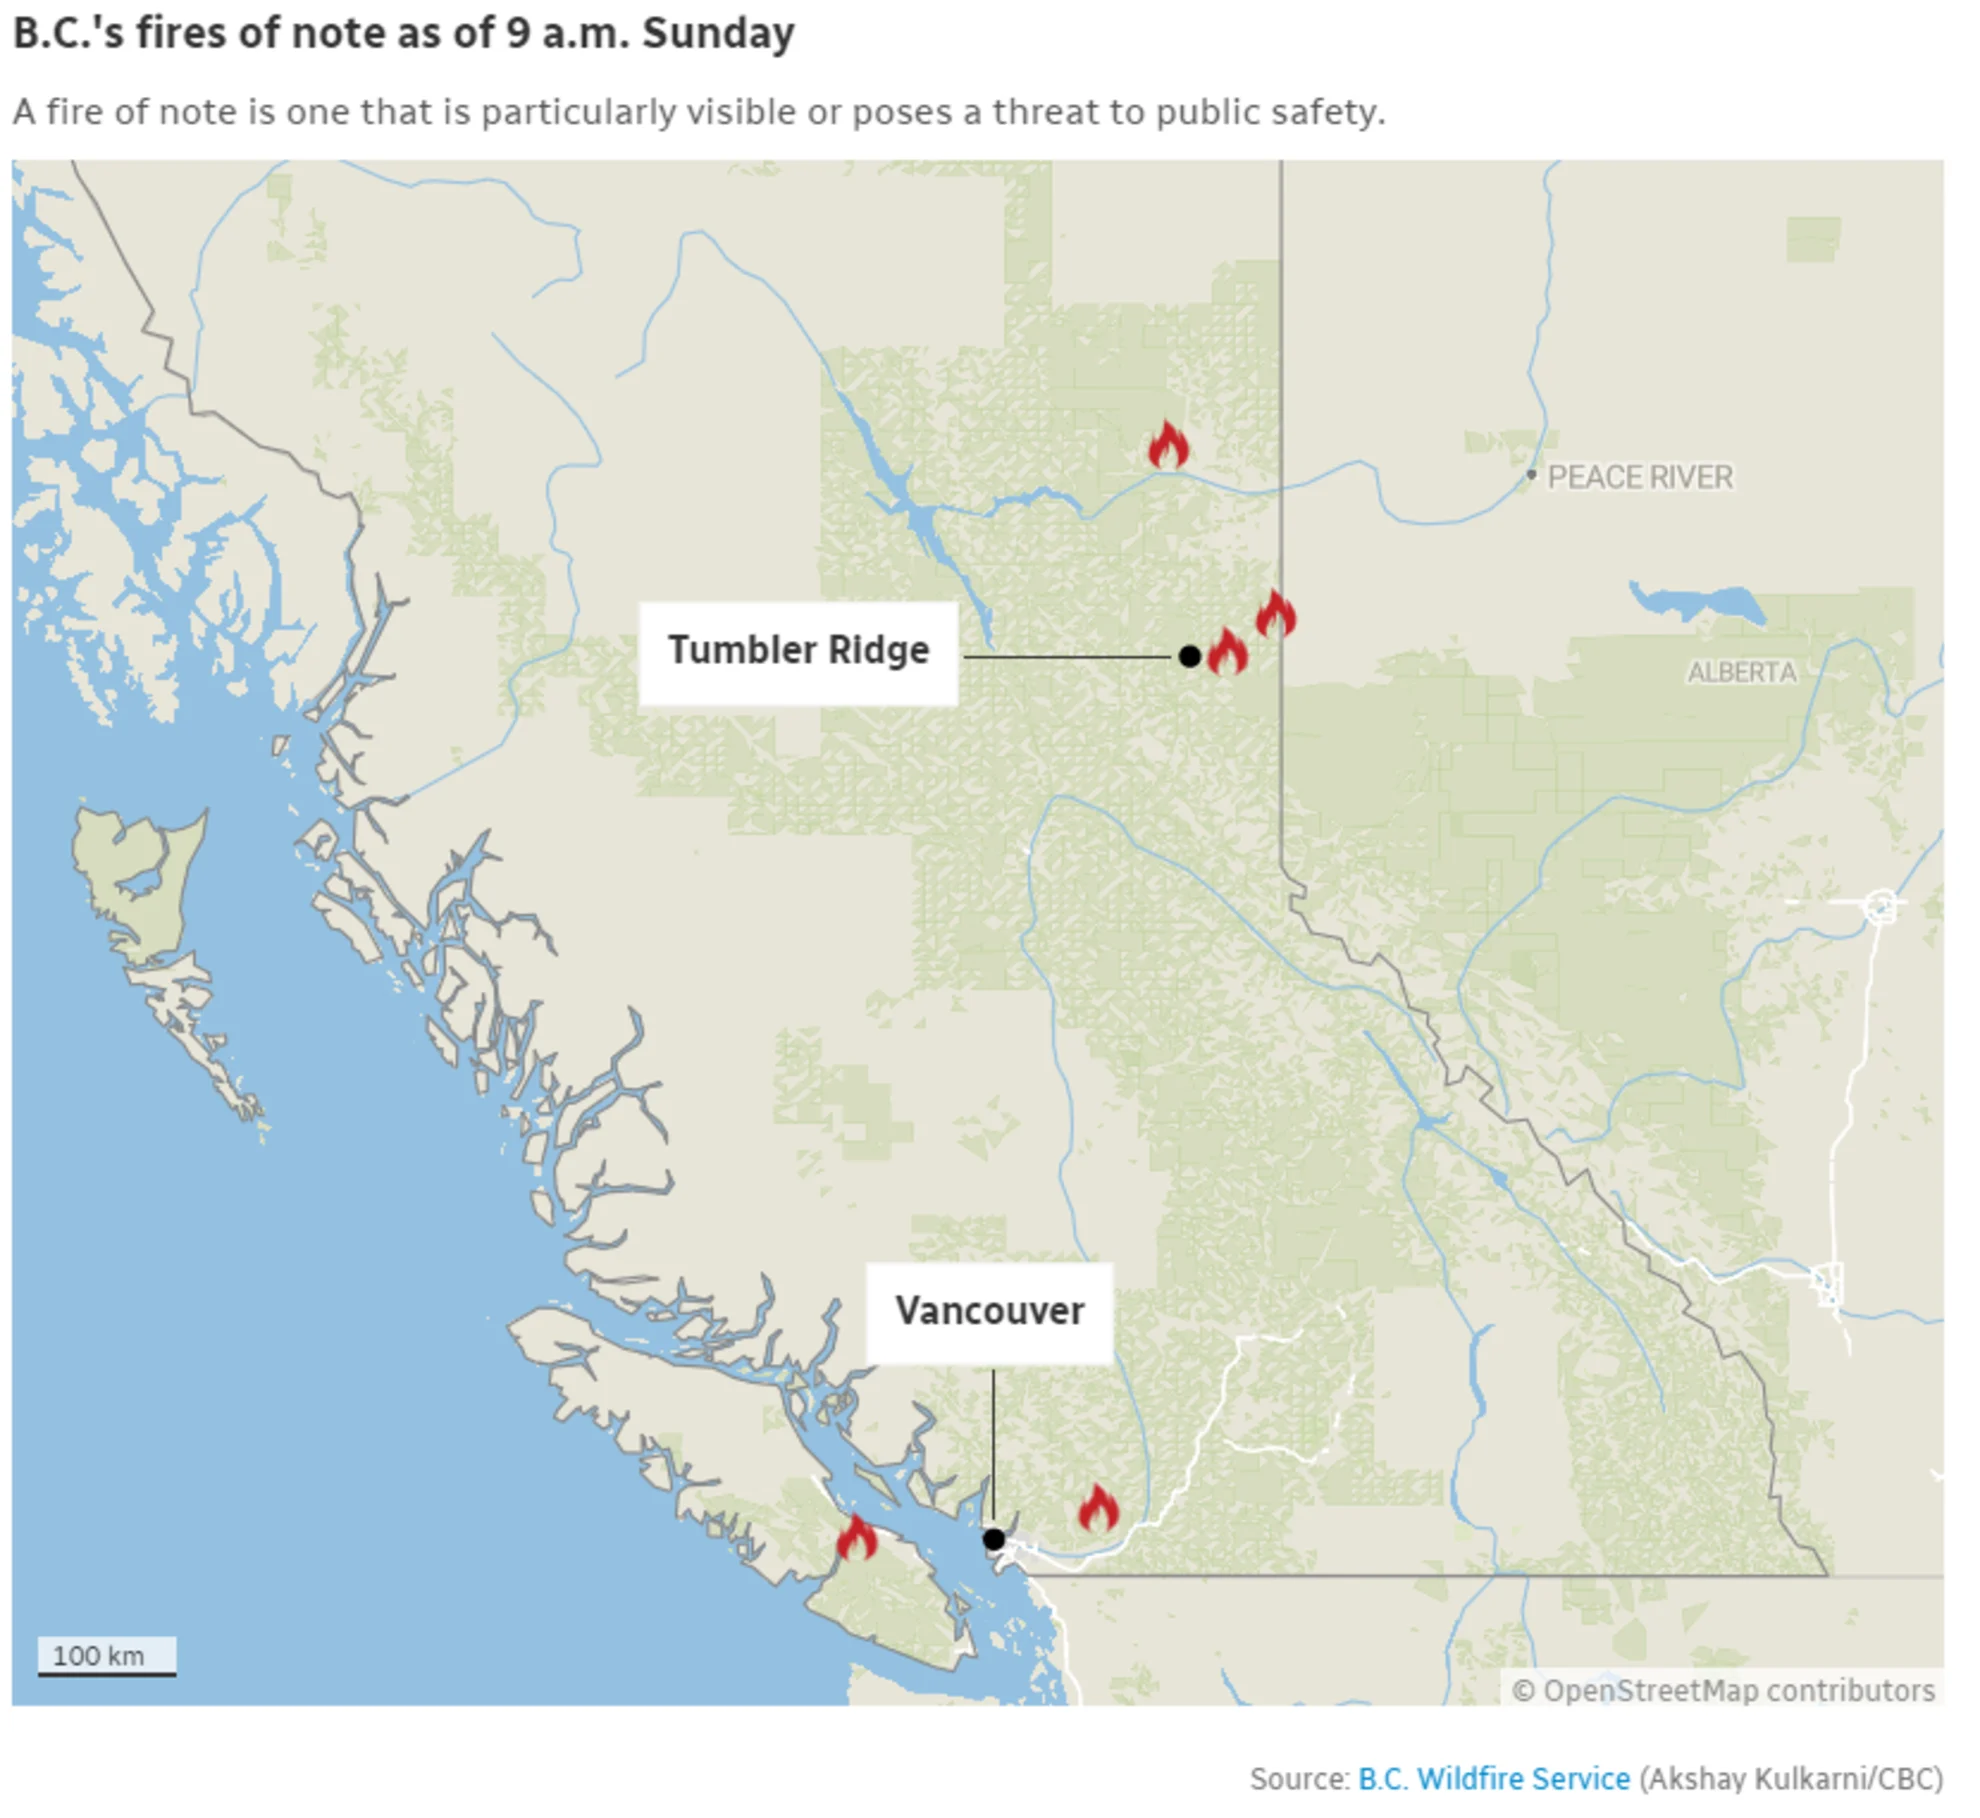 CBC - BC wildfires of note - June12